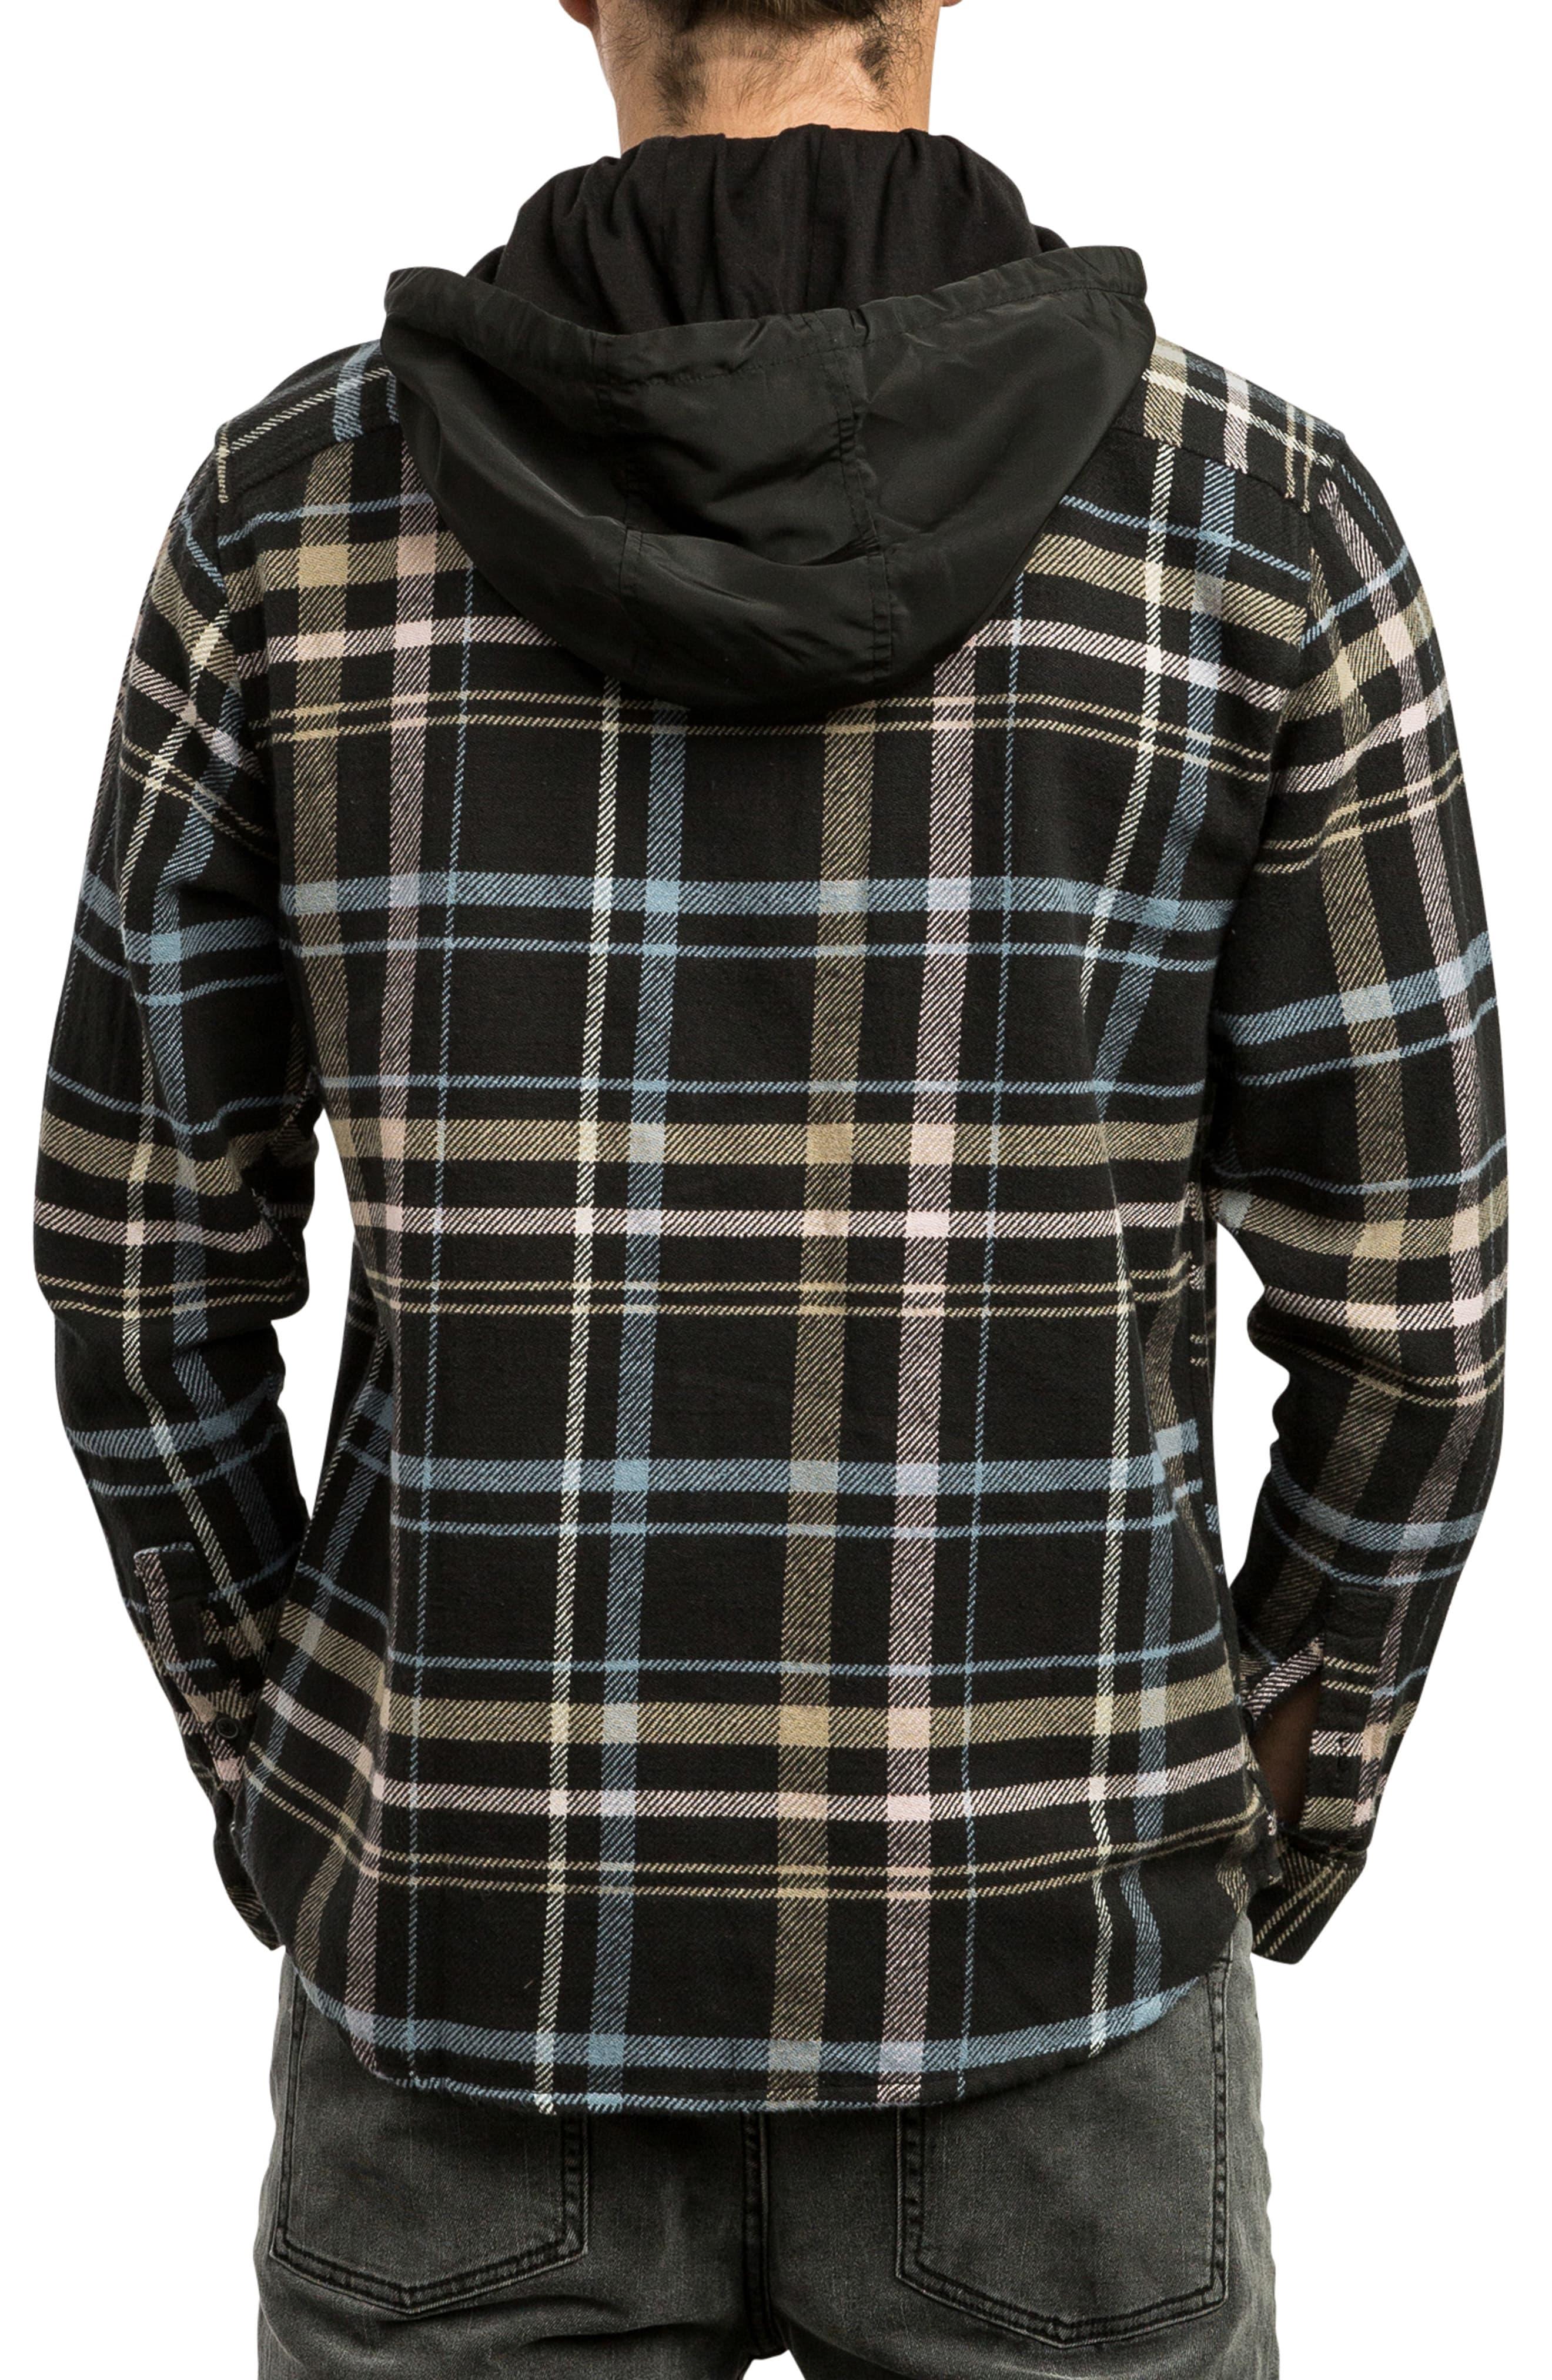 RVCA Essex Hooded Flannel Shirt in Olive (Green) for Men - Lyst